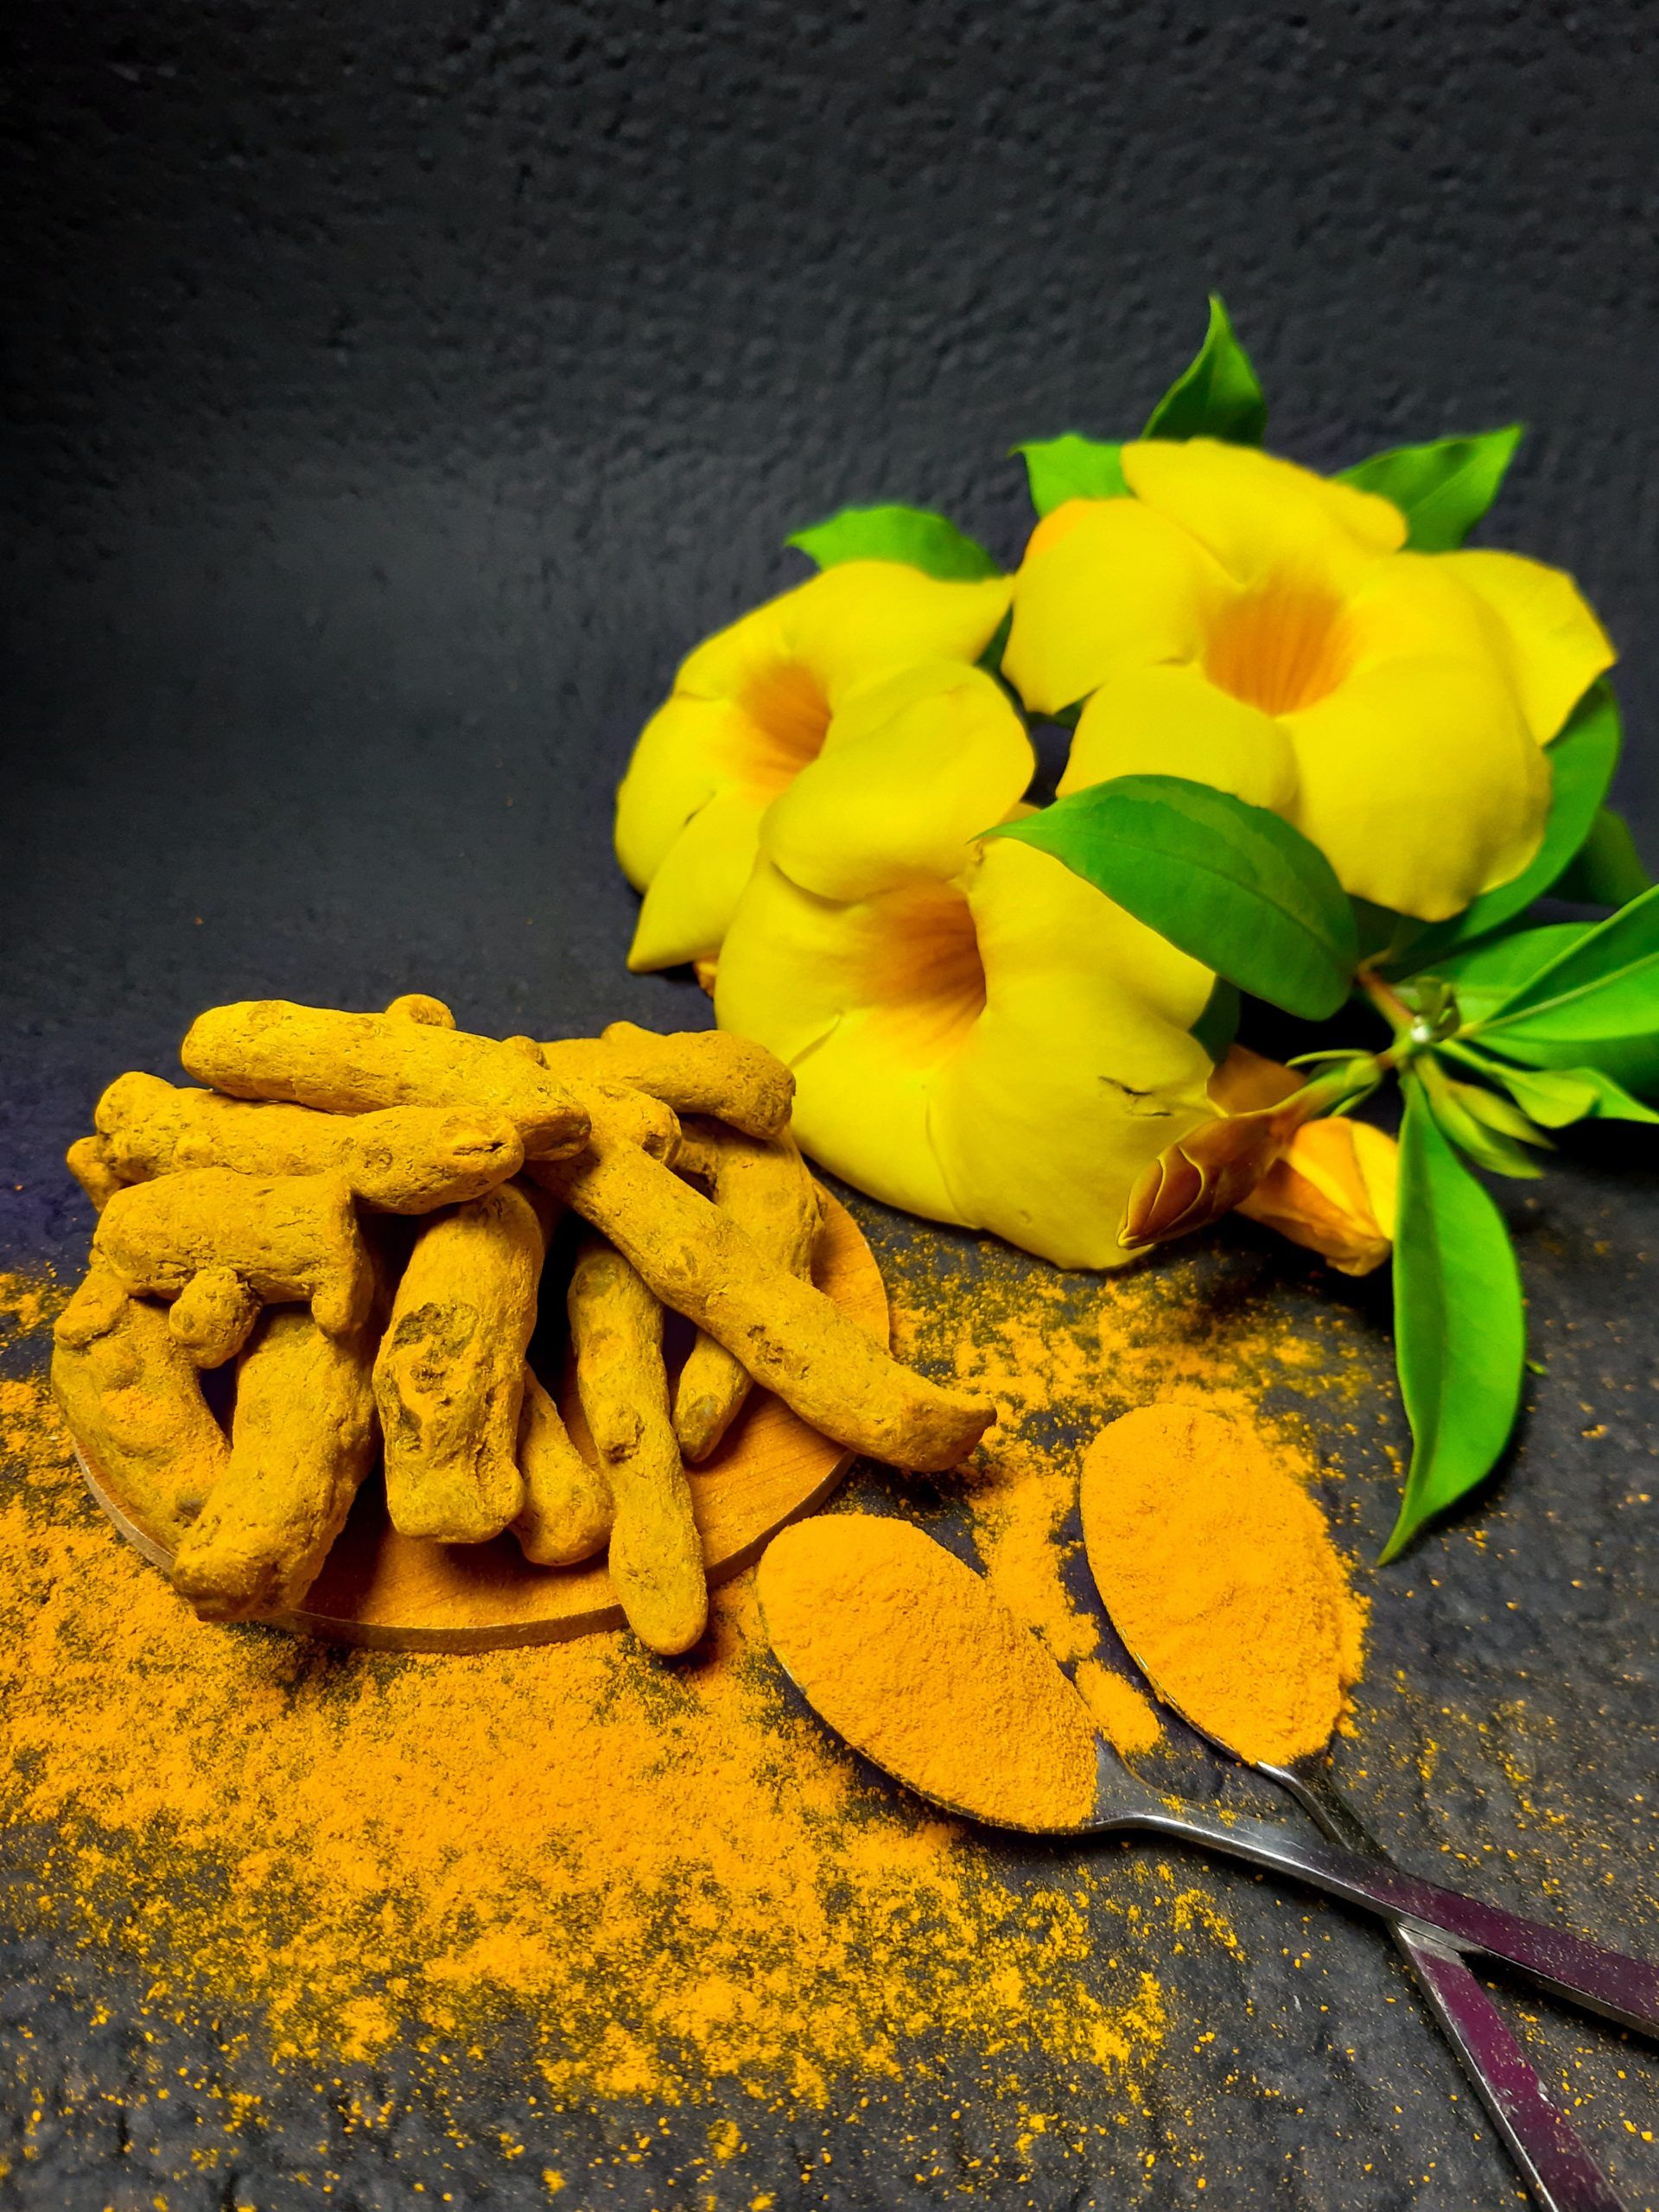 Turmeric for hair: The golden spice can help fight hair loss and dandruff